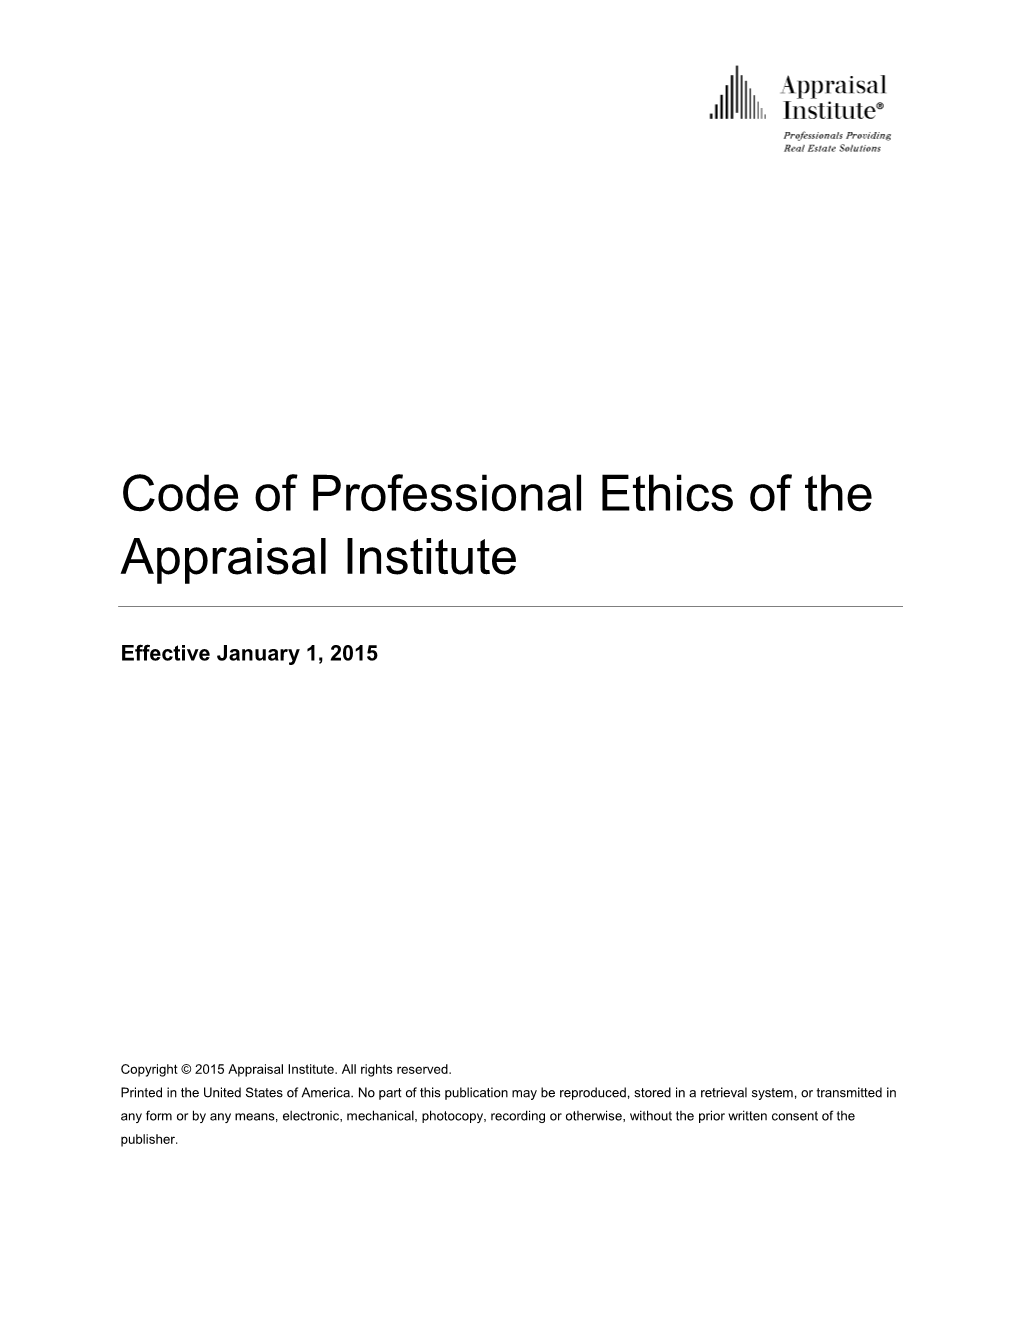 Code of Professional Ethics of the Appraisal Institute